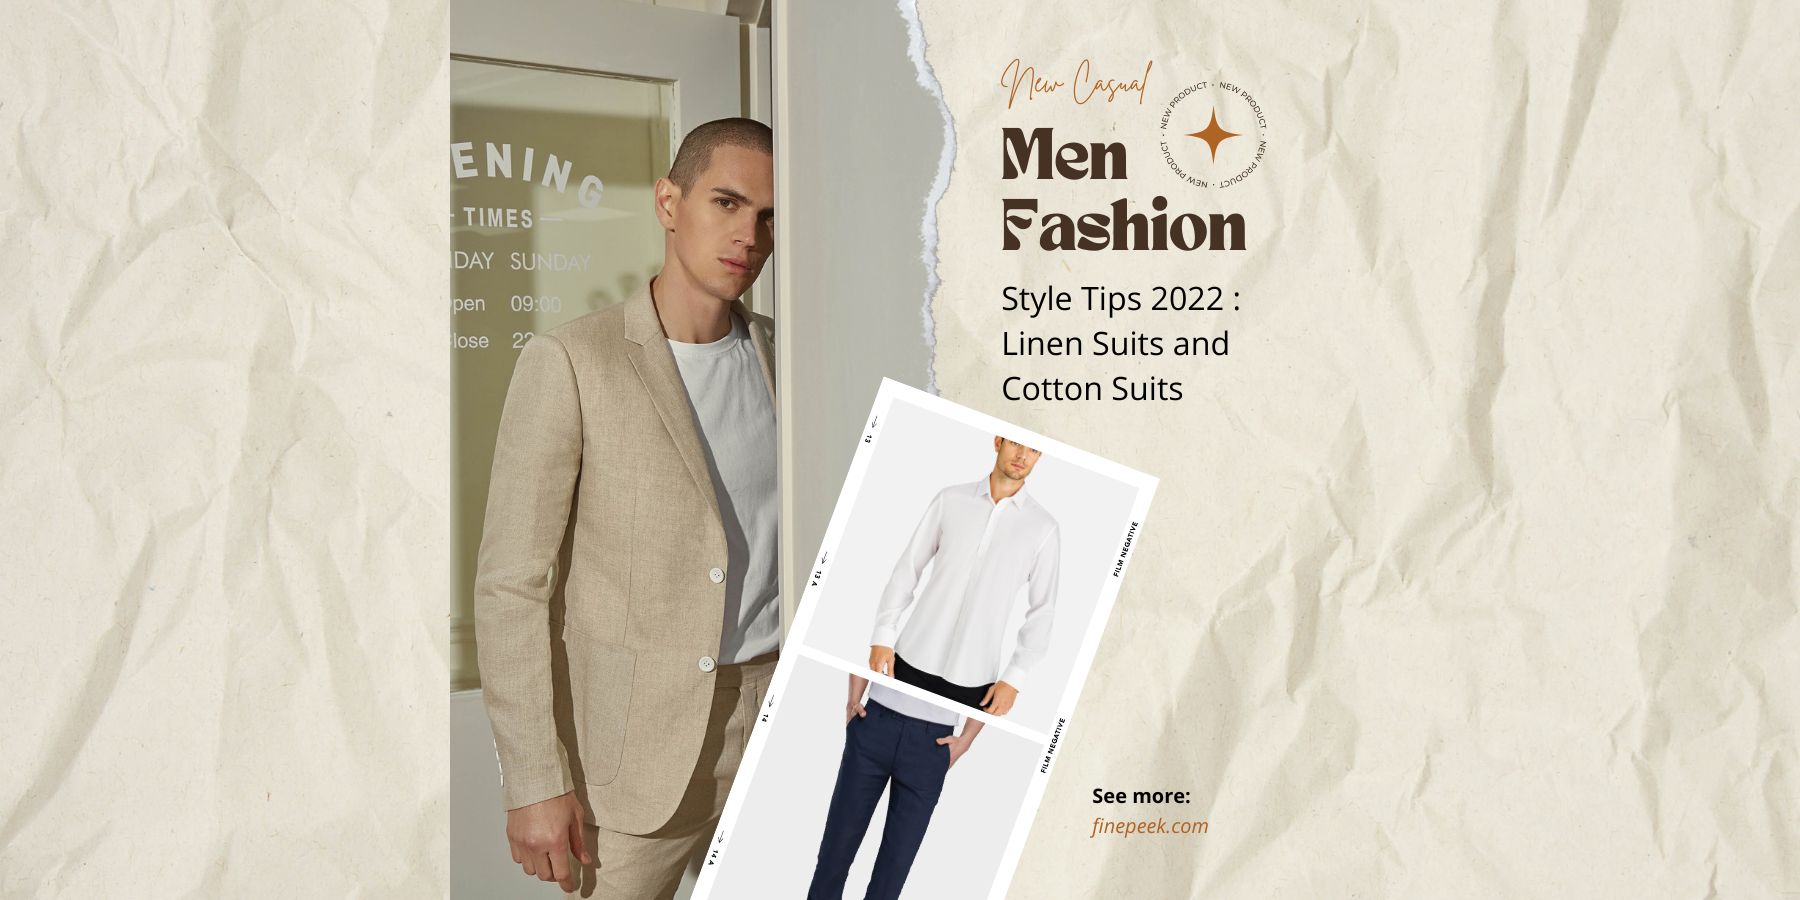 Style Tips 2022 : Linen Suits and Cotton Suits